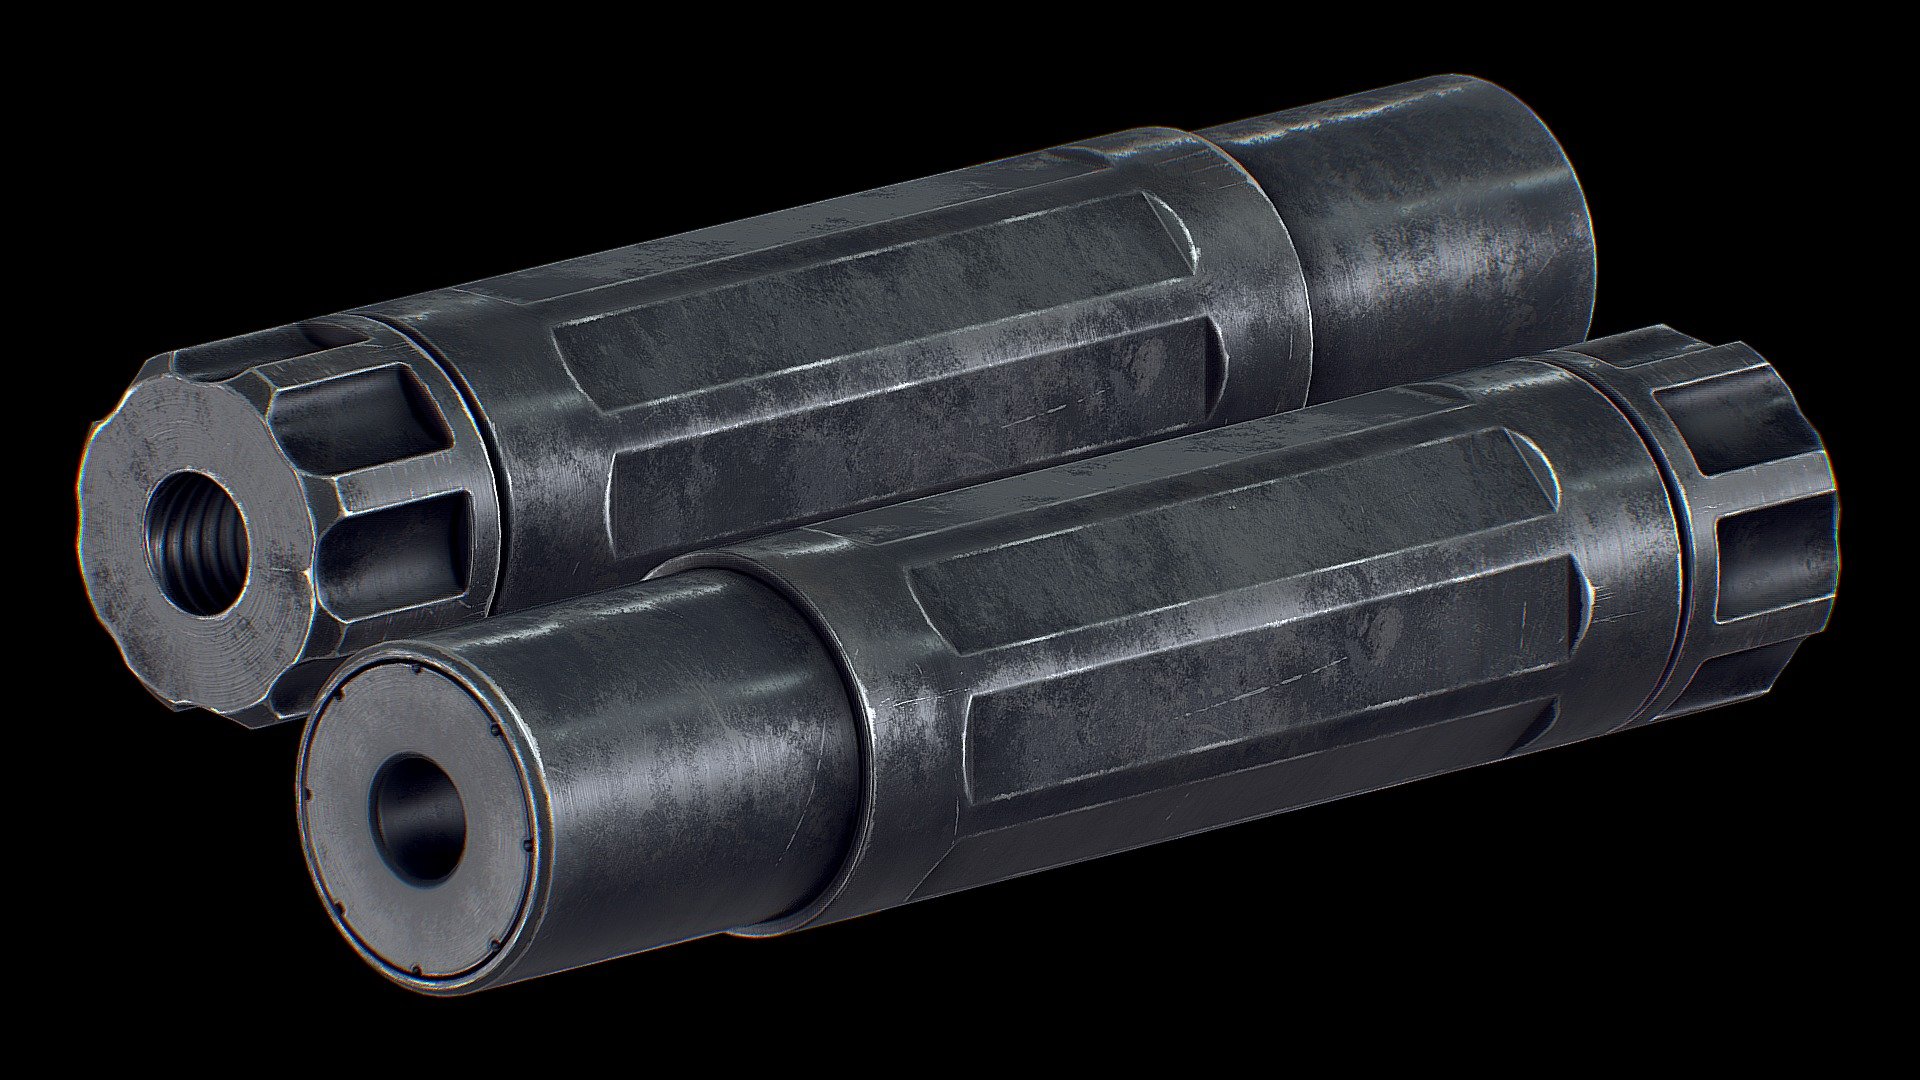 This model is free, so please consider liking it. Subscribe for more models like this one!

Features:



Not sure what model this particular silencer is, I've just modeled the first thing I've liked :) 

1 4x2K texture (OP, but you can always scale it down)


How I made it:



Modeled in Plasticity, Uv’d in Blender, Sculpted in Zbrush, baked in Marmoset Toolbag and textured in Substance Painter.

Made in ~16H

This project on ARTSTATION: HERE


Check out my Socials:
linktr.ee/valterjherson

Available for part time work! Contact me!

This model is free to use, please consider subscribing to my socials!

If you plan to use this model in your projects, please let me know!


My other projects:



skfb.ly/oKtFR

skfb.ly/ouIYY

skfb.ly/owyQQ

skfb.ly/ouEUR

skfb.ly/ouIZz

skfb.ly/ow9EQ

skfb.ly/oxYT8

skfb.ly/ouXLO

skfb.ly/oxPn8

skfb.ly/oxVH6

skfb.ly/oyqVG

skfb.ly/ov9u7
 - DTKP Suppressor/Silencer Lowpoly Gameready - Download Free 3D model by valterjherson1 3d model